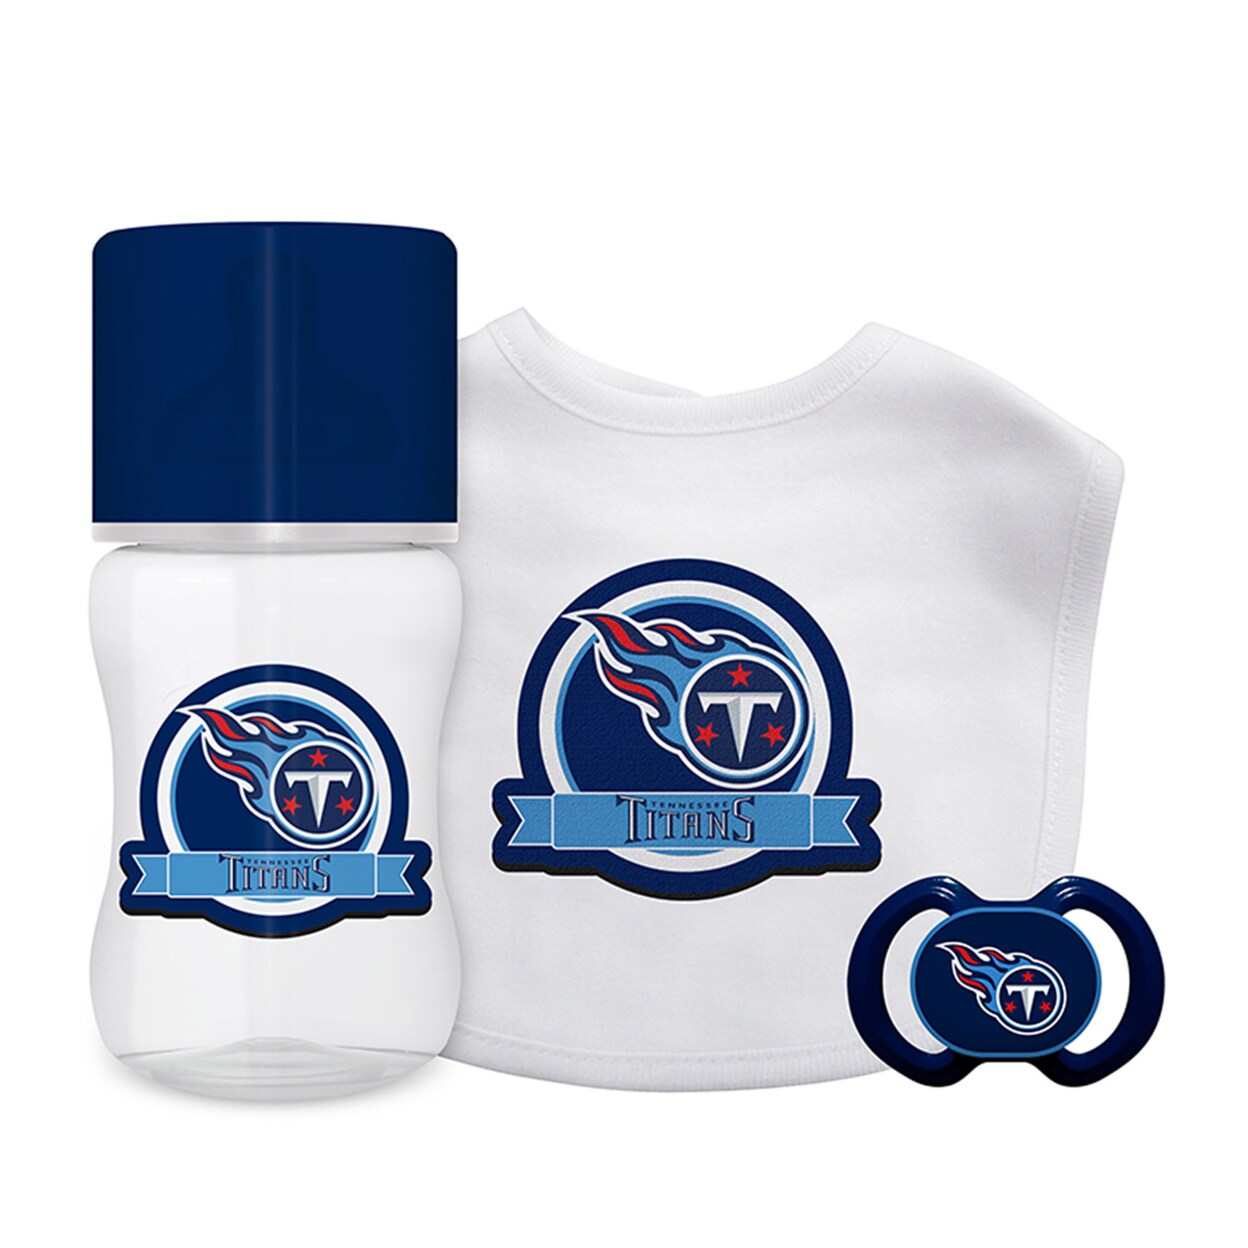 Baby Fanatic Officially Licensed 3 Piece Unisex Gift Set - NFL Tennessee  Titans